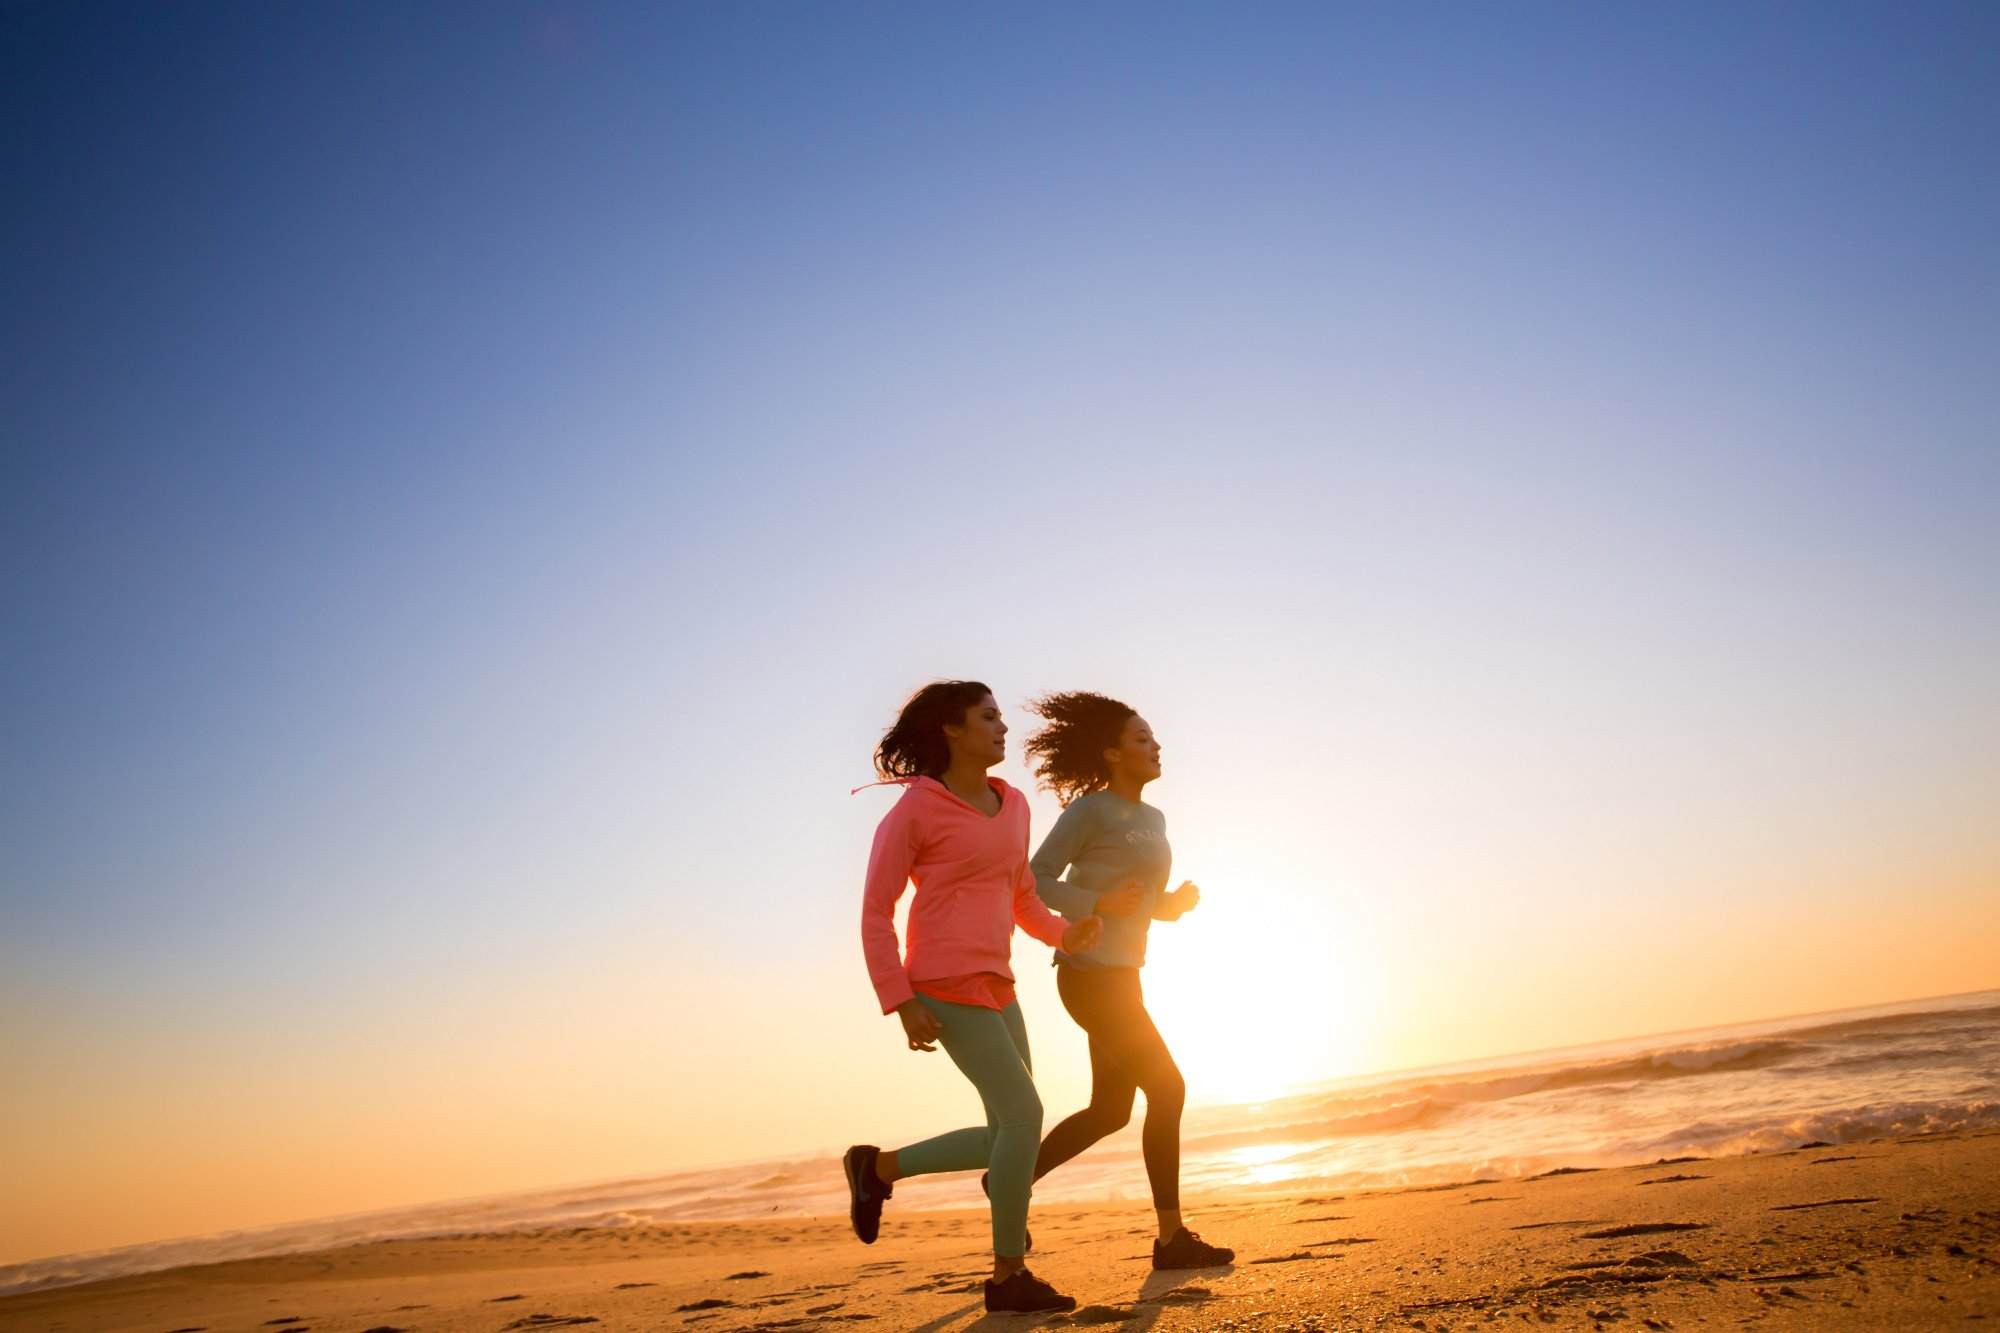 Two women practicing self-care by running on the beach at sunset for improved mental health.